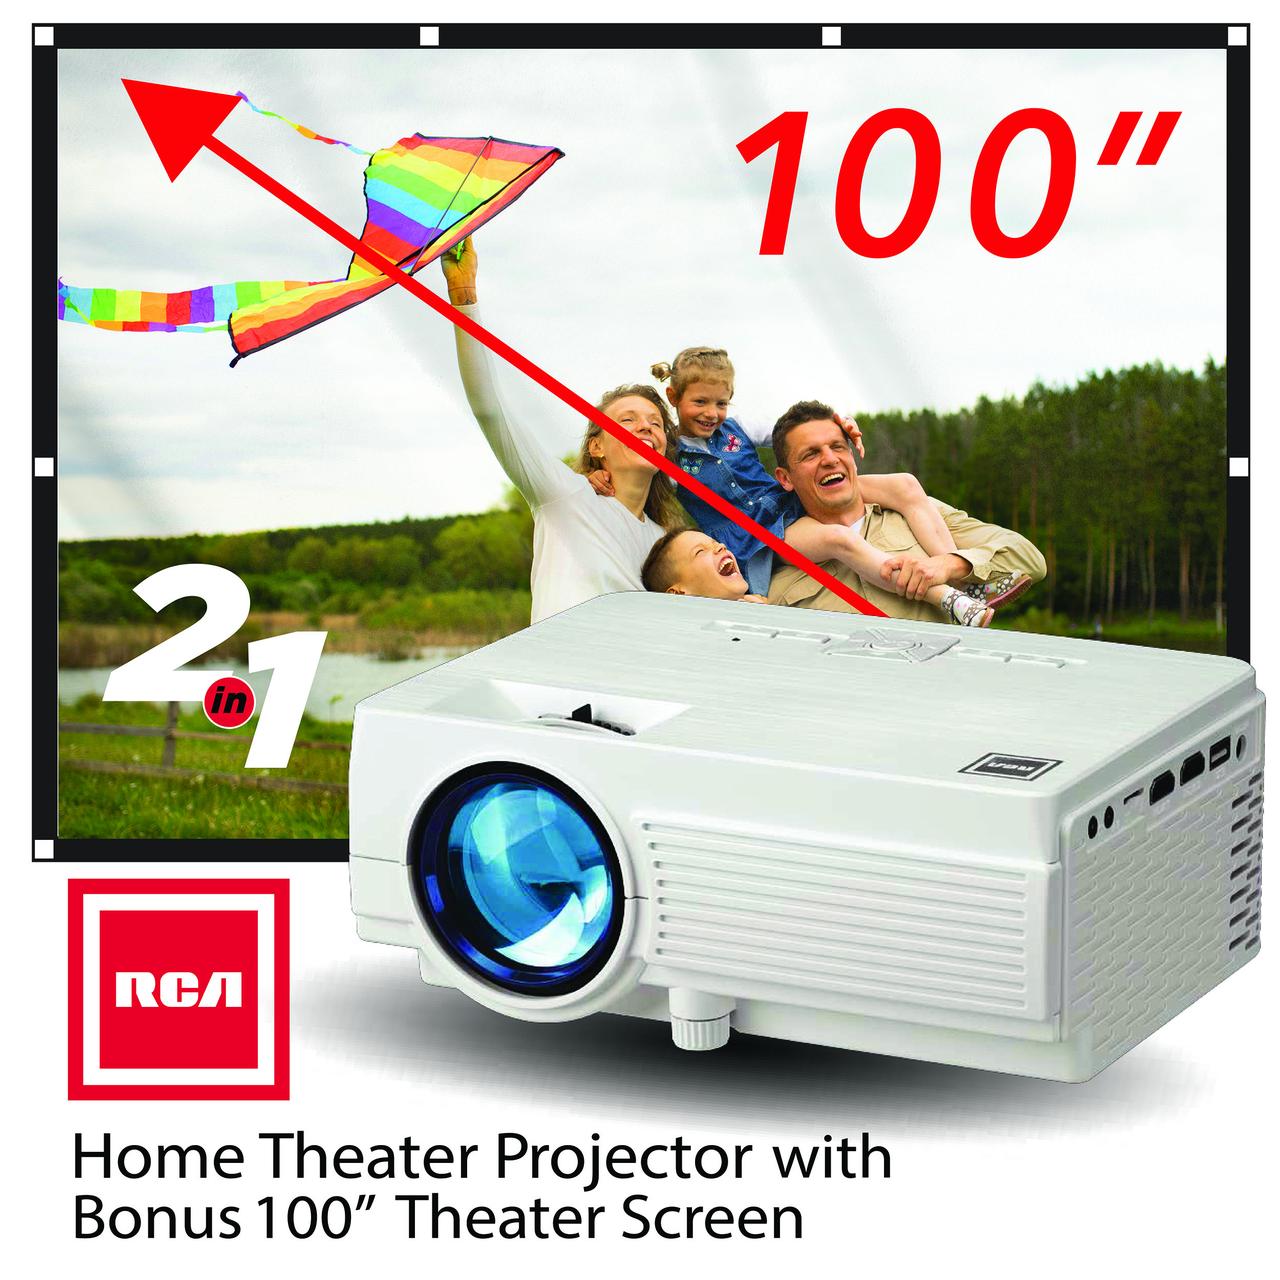 RCA, 480P LCD HD Home Theater Projector with Bonus 100" Fold up Projector Screen, RPJ166-Combo - image 16 of 16